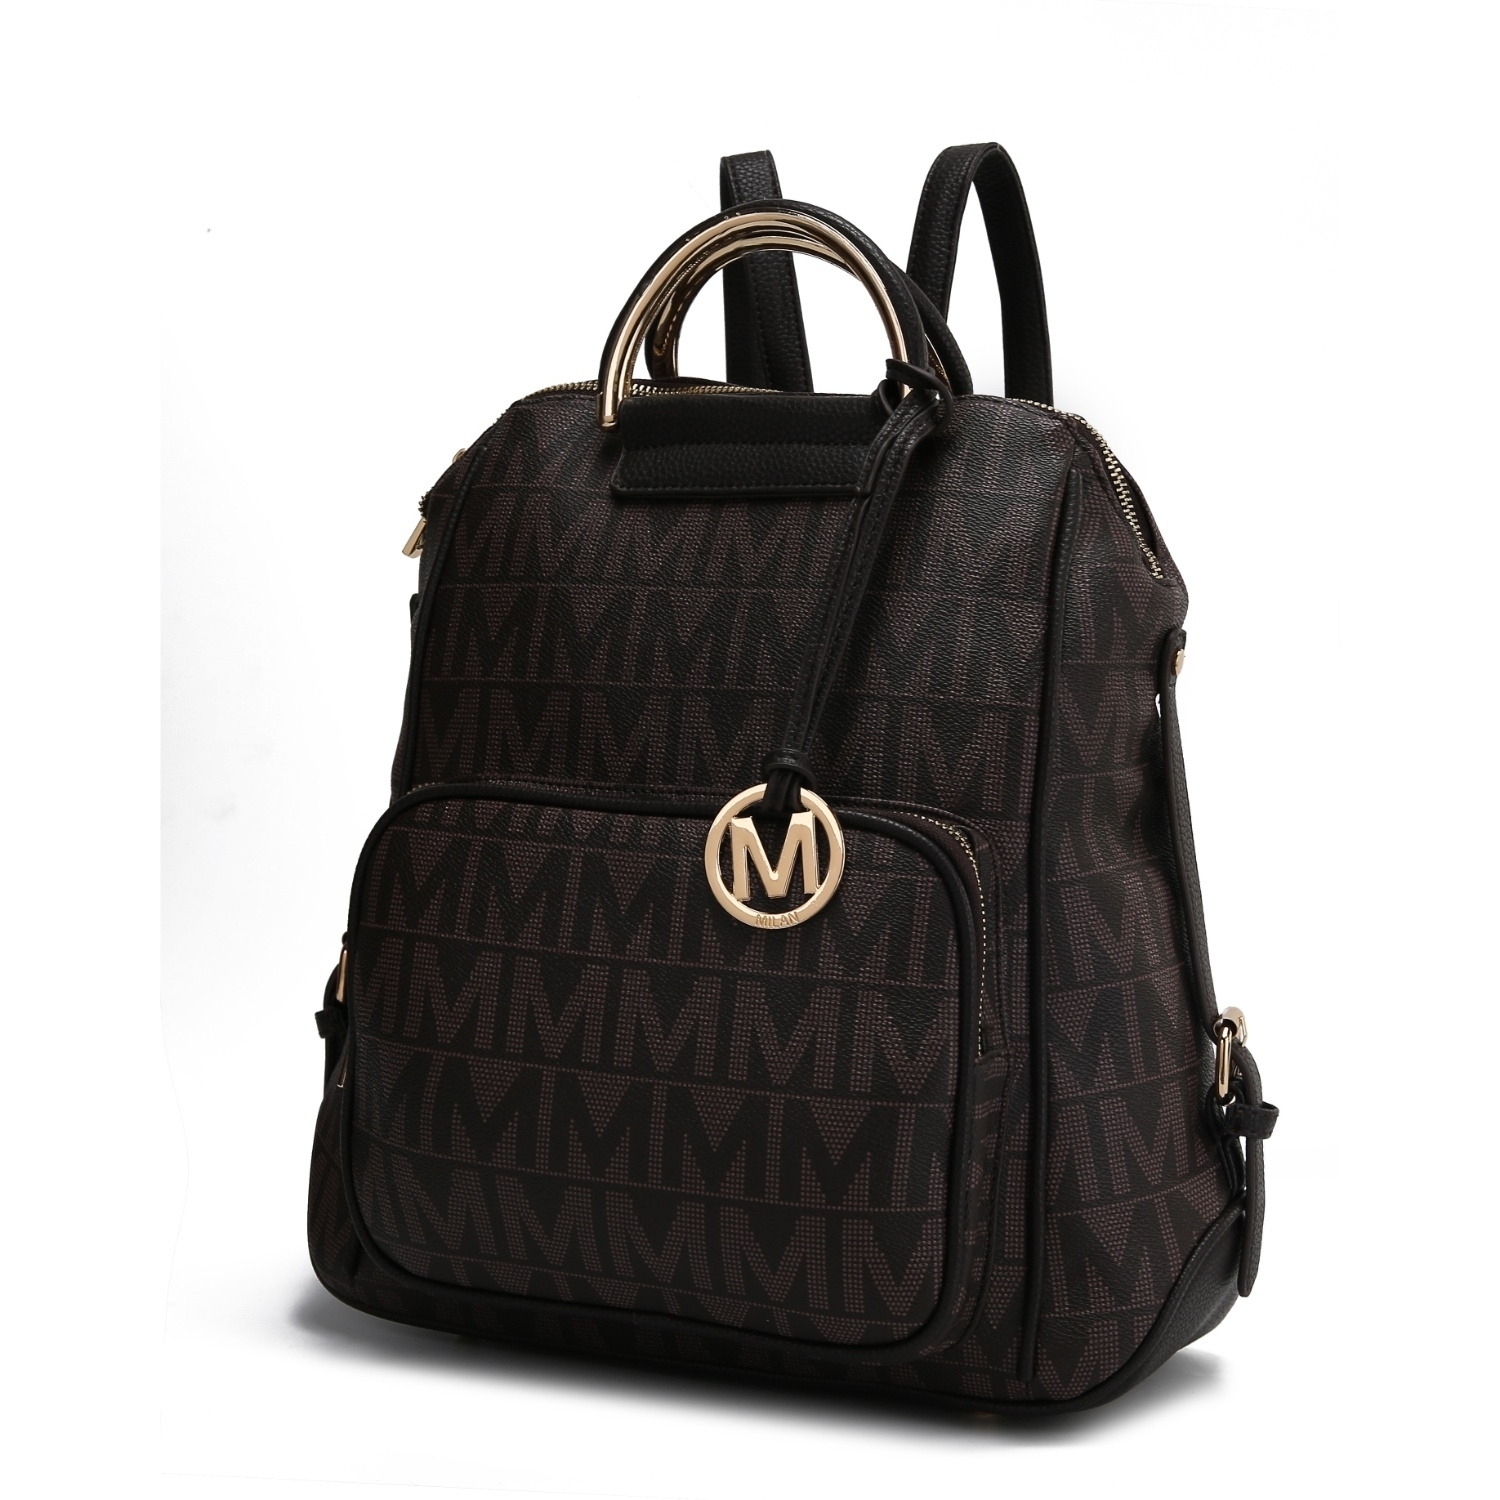 MKF Collection Cora Milan M Signature Trendy Backpack By Mia K. - Chocolate